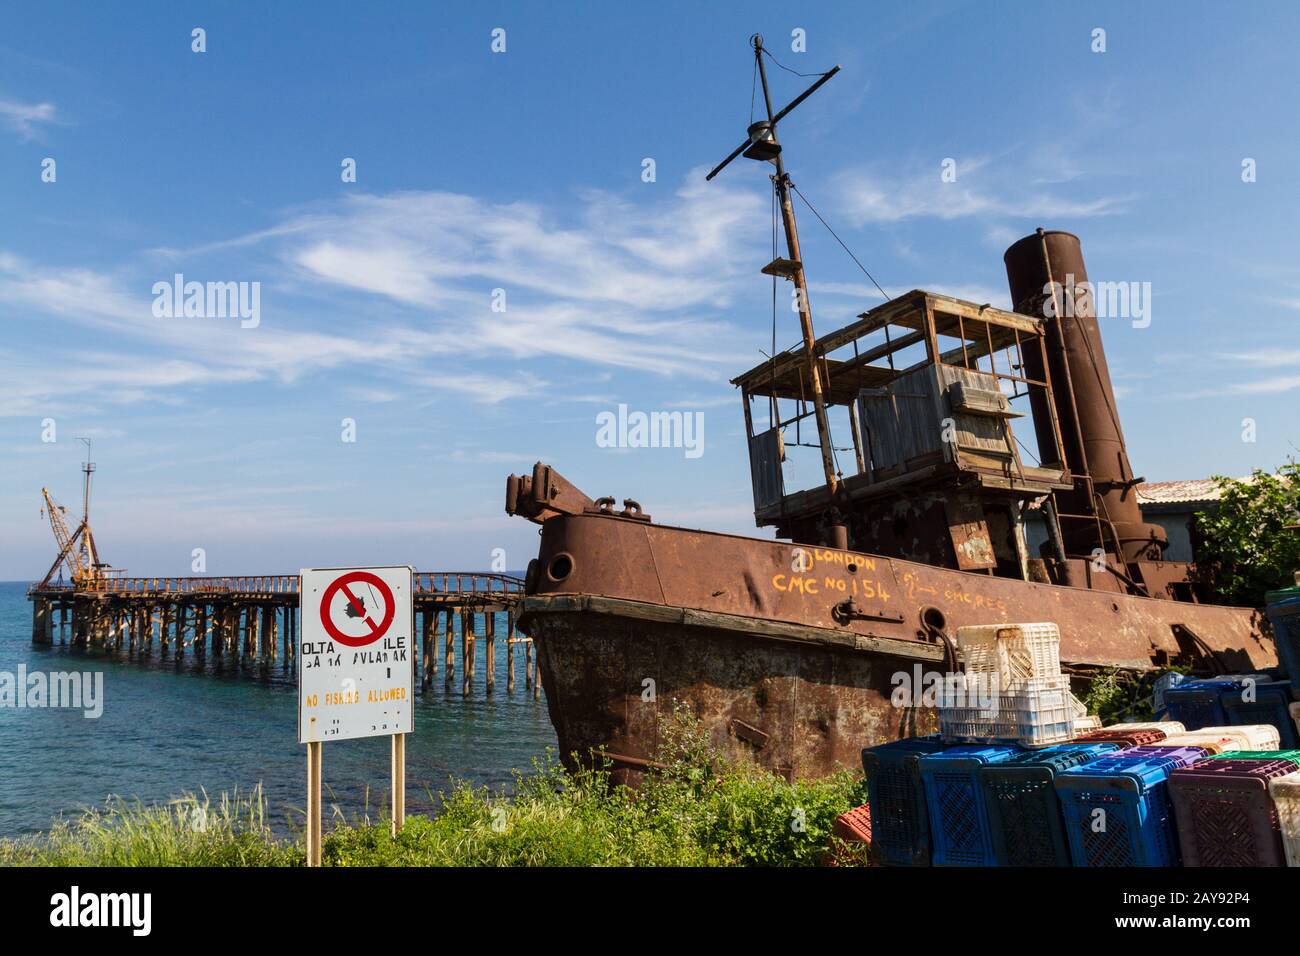 Derelict Steam Boat and Pier at Xeros, Cyprus Stock Photo